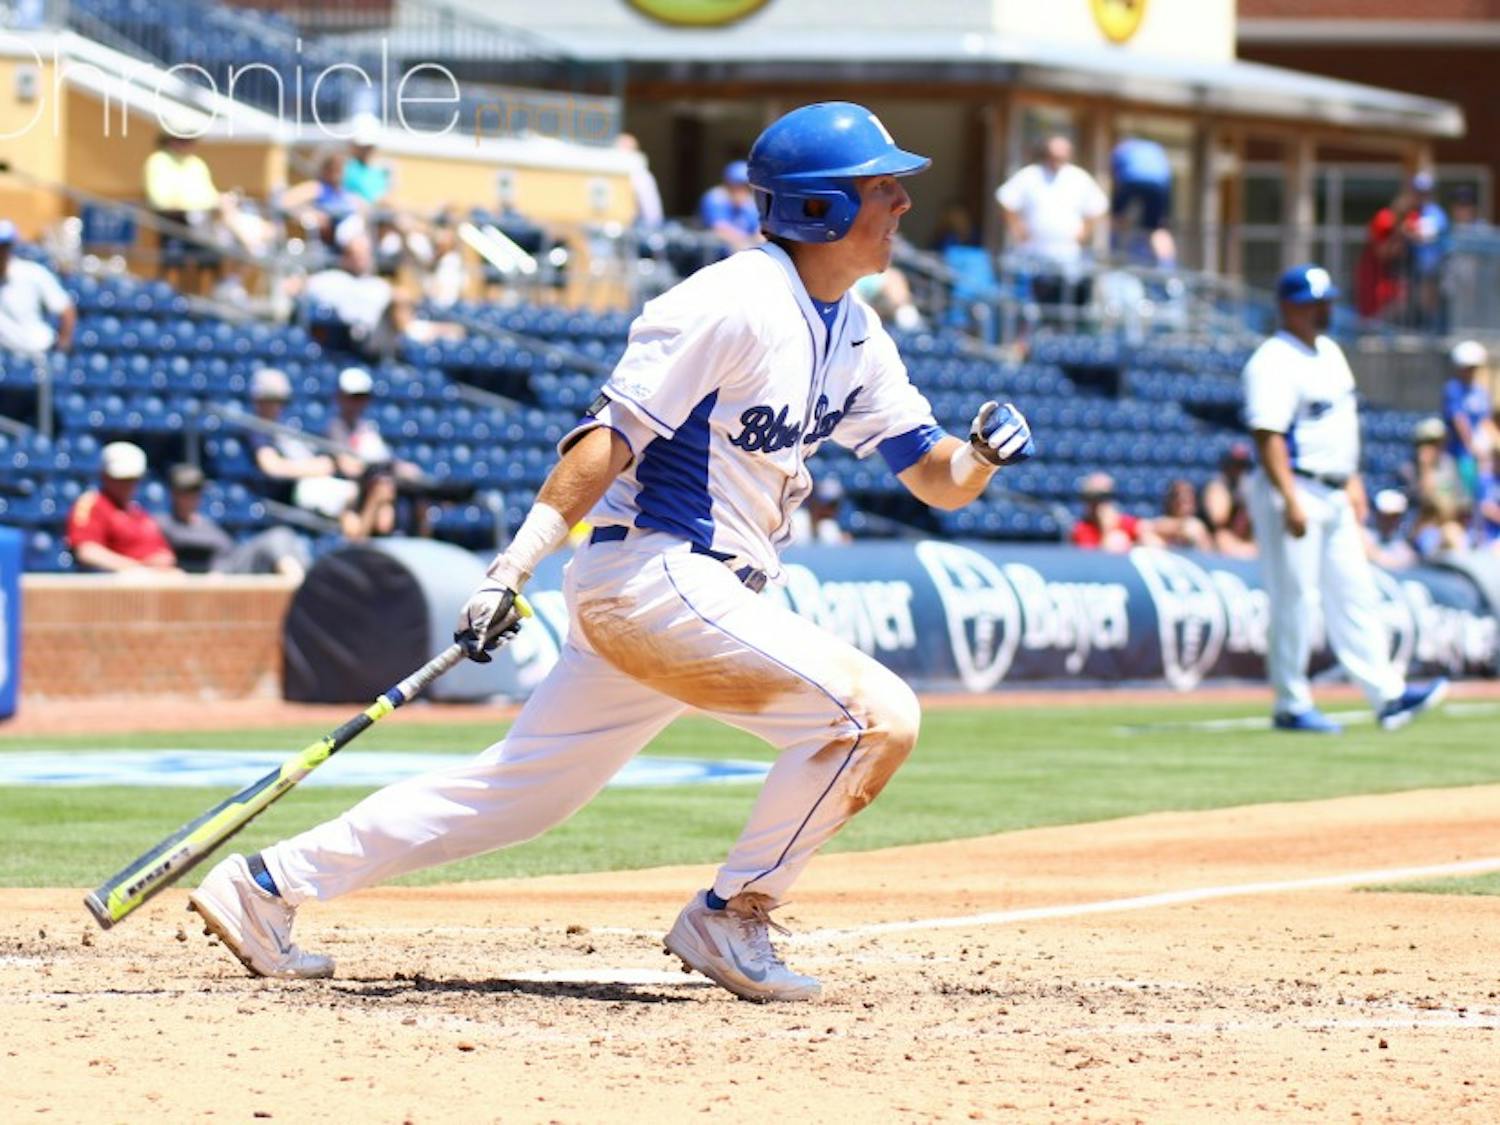 Although Peter Zyla and the Blue Devils capitalized on Wake Forest’s miscues Saturday, they were the ones making mistakes all over the diamond Sunday.